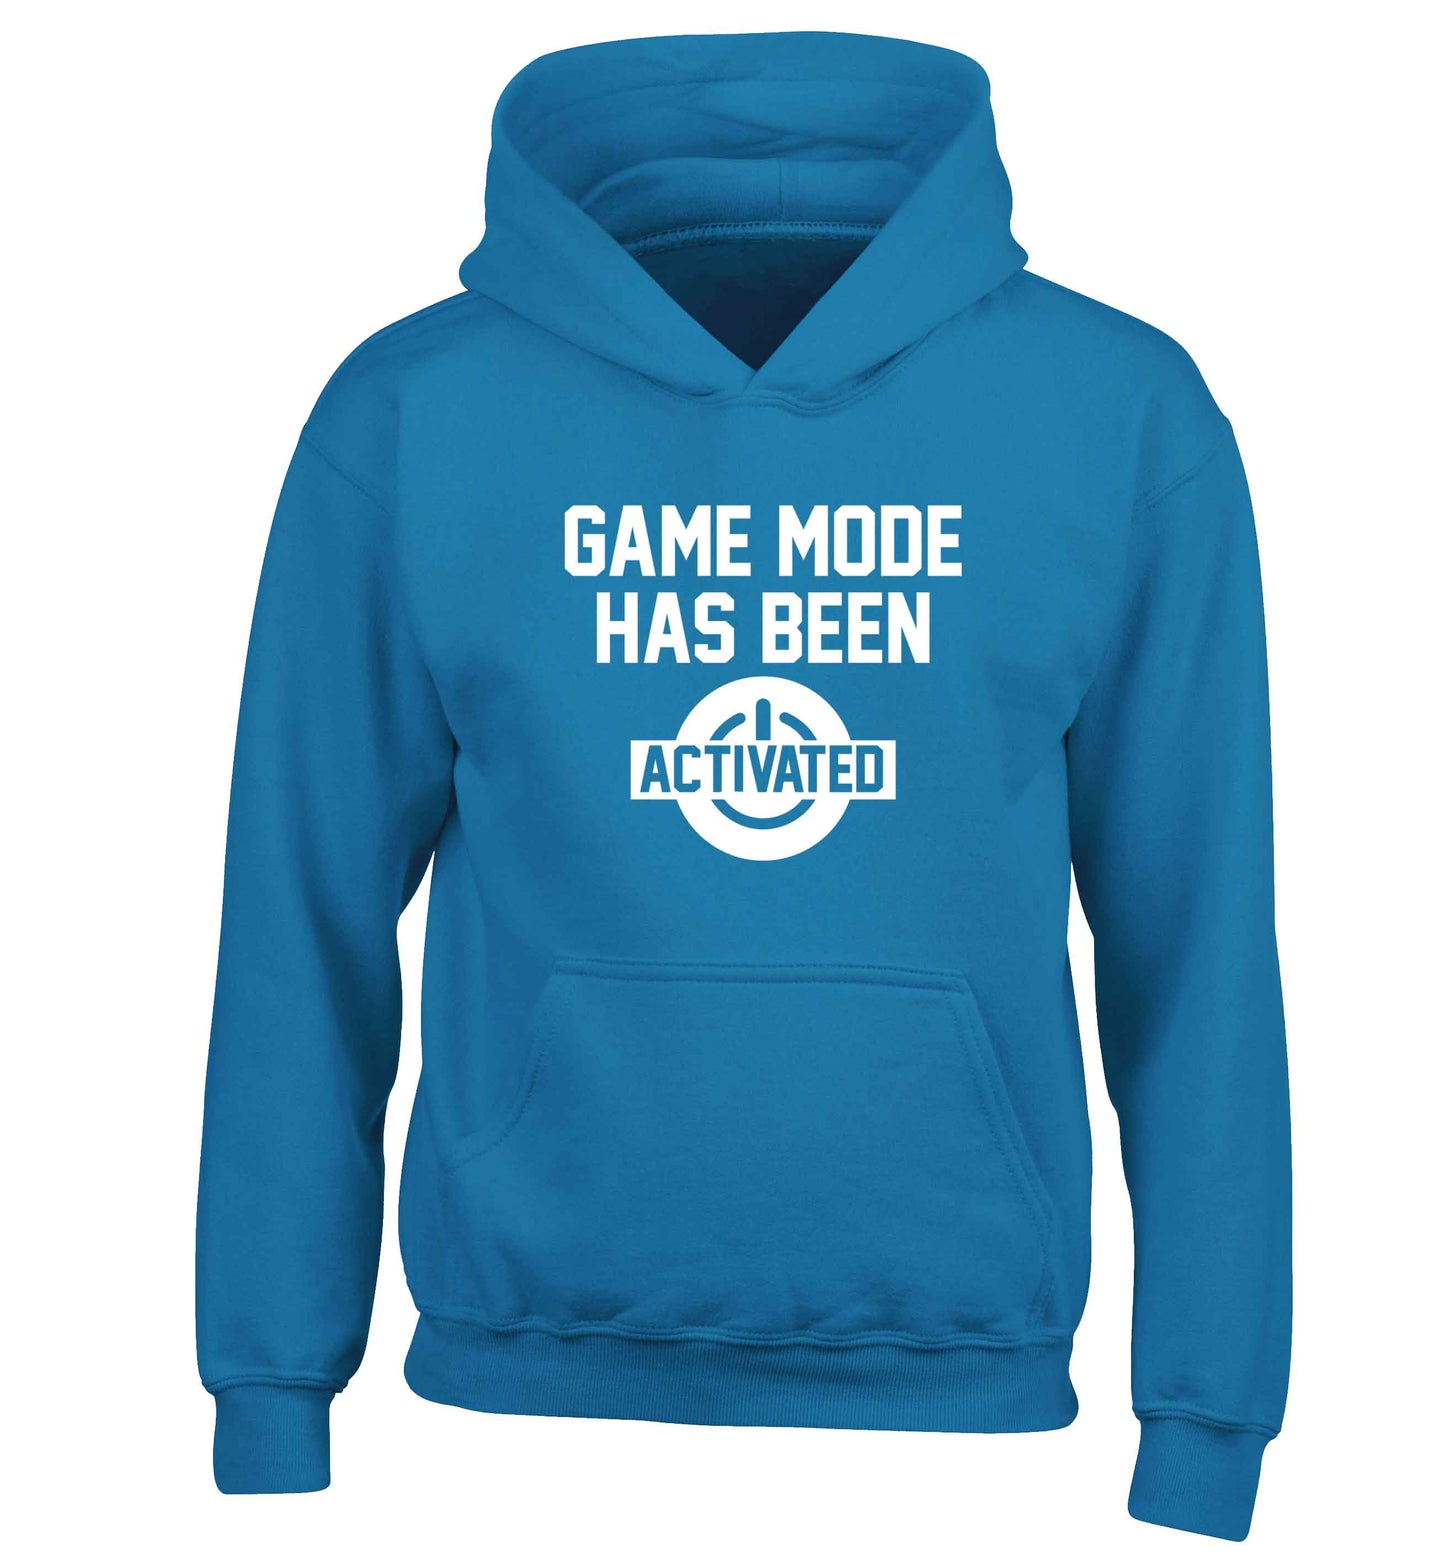 Game mode has been activated children's blue hoodie 12-13 Years